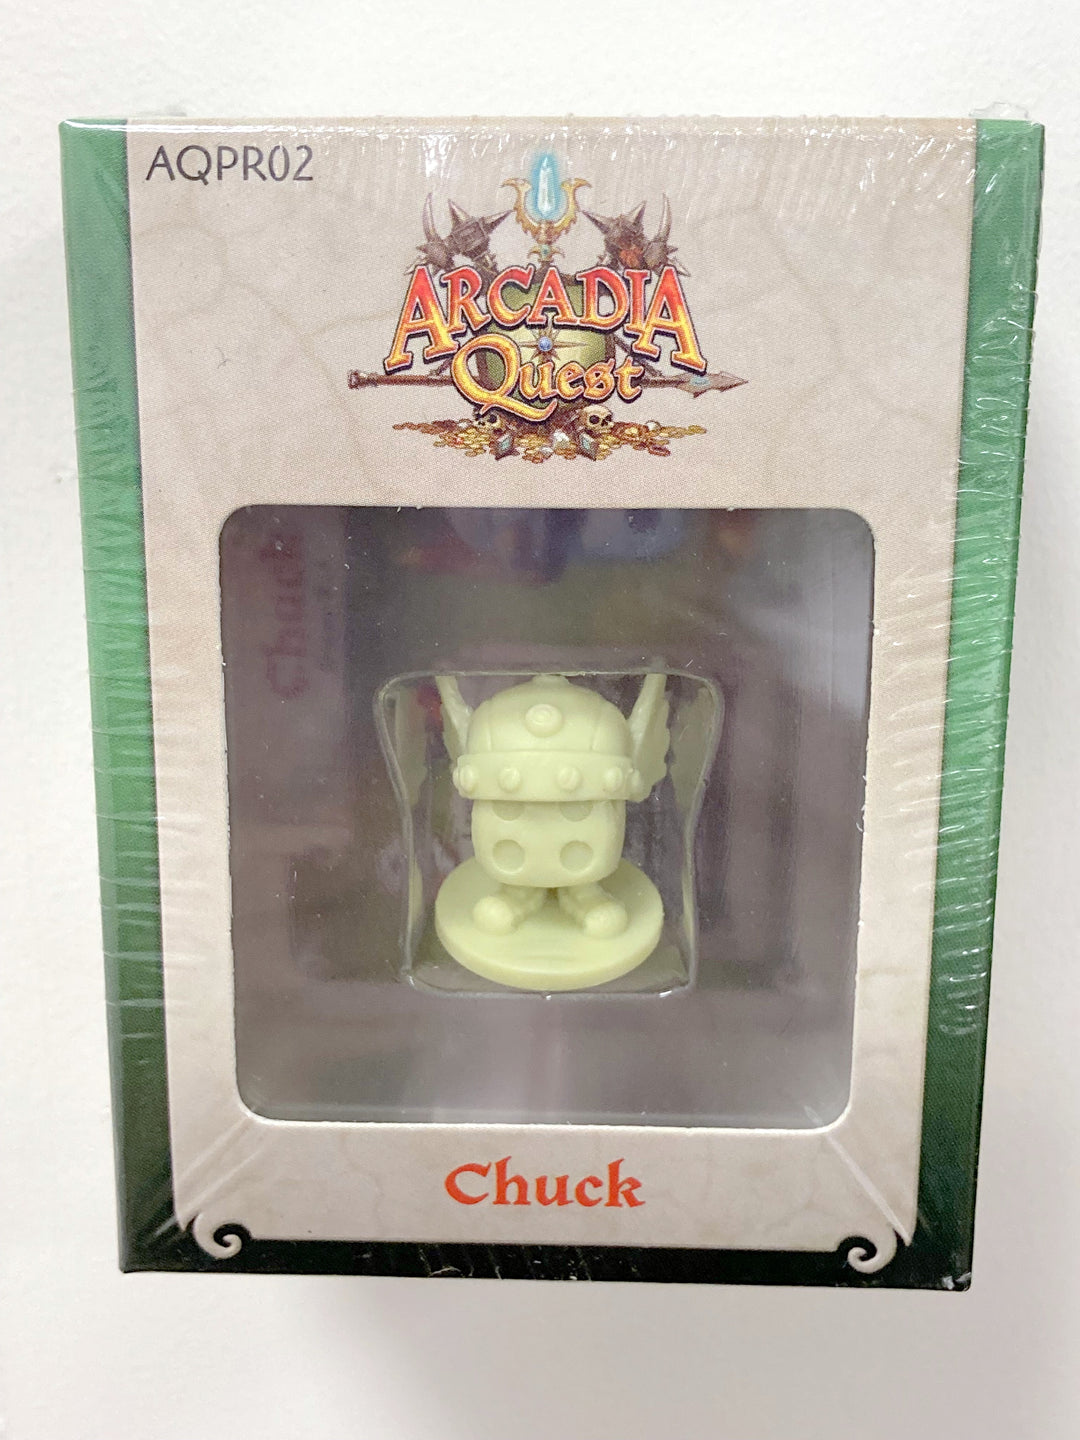 A picture of a plastic miniature character for use with the board game Arcadia Quest. This feature is labelled "Chuck" and is a six-sided die with shoes and wearing a horned Viking helmet.